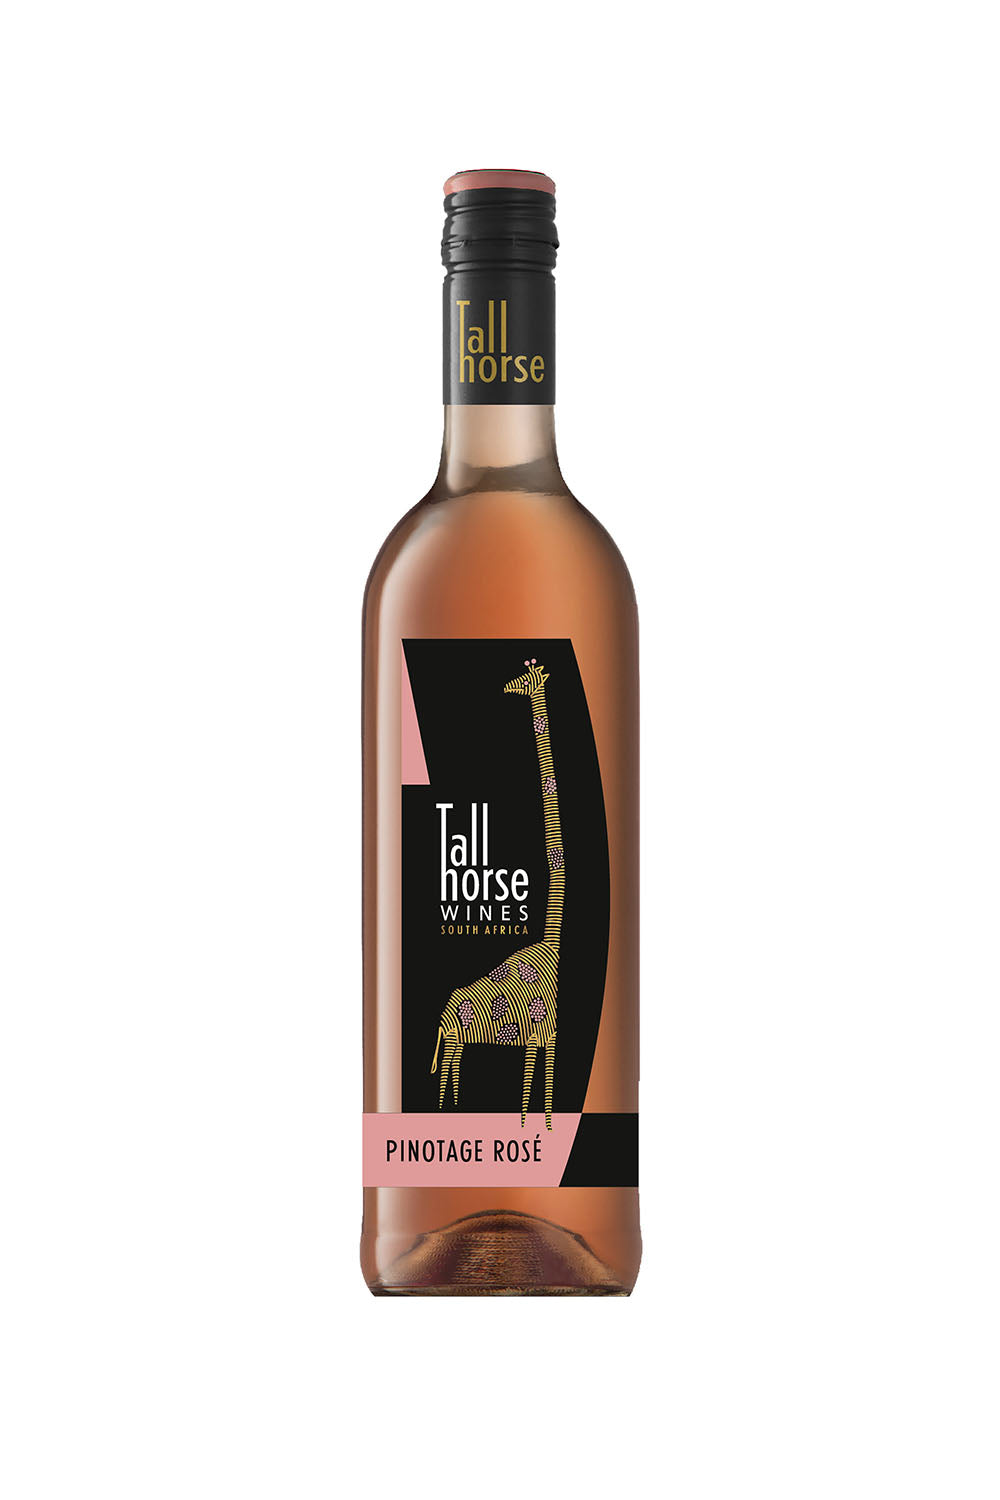 Tall Horse Pinotage Rose 2019